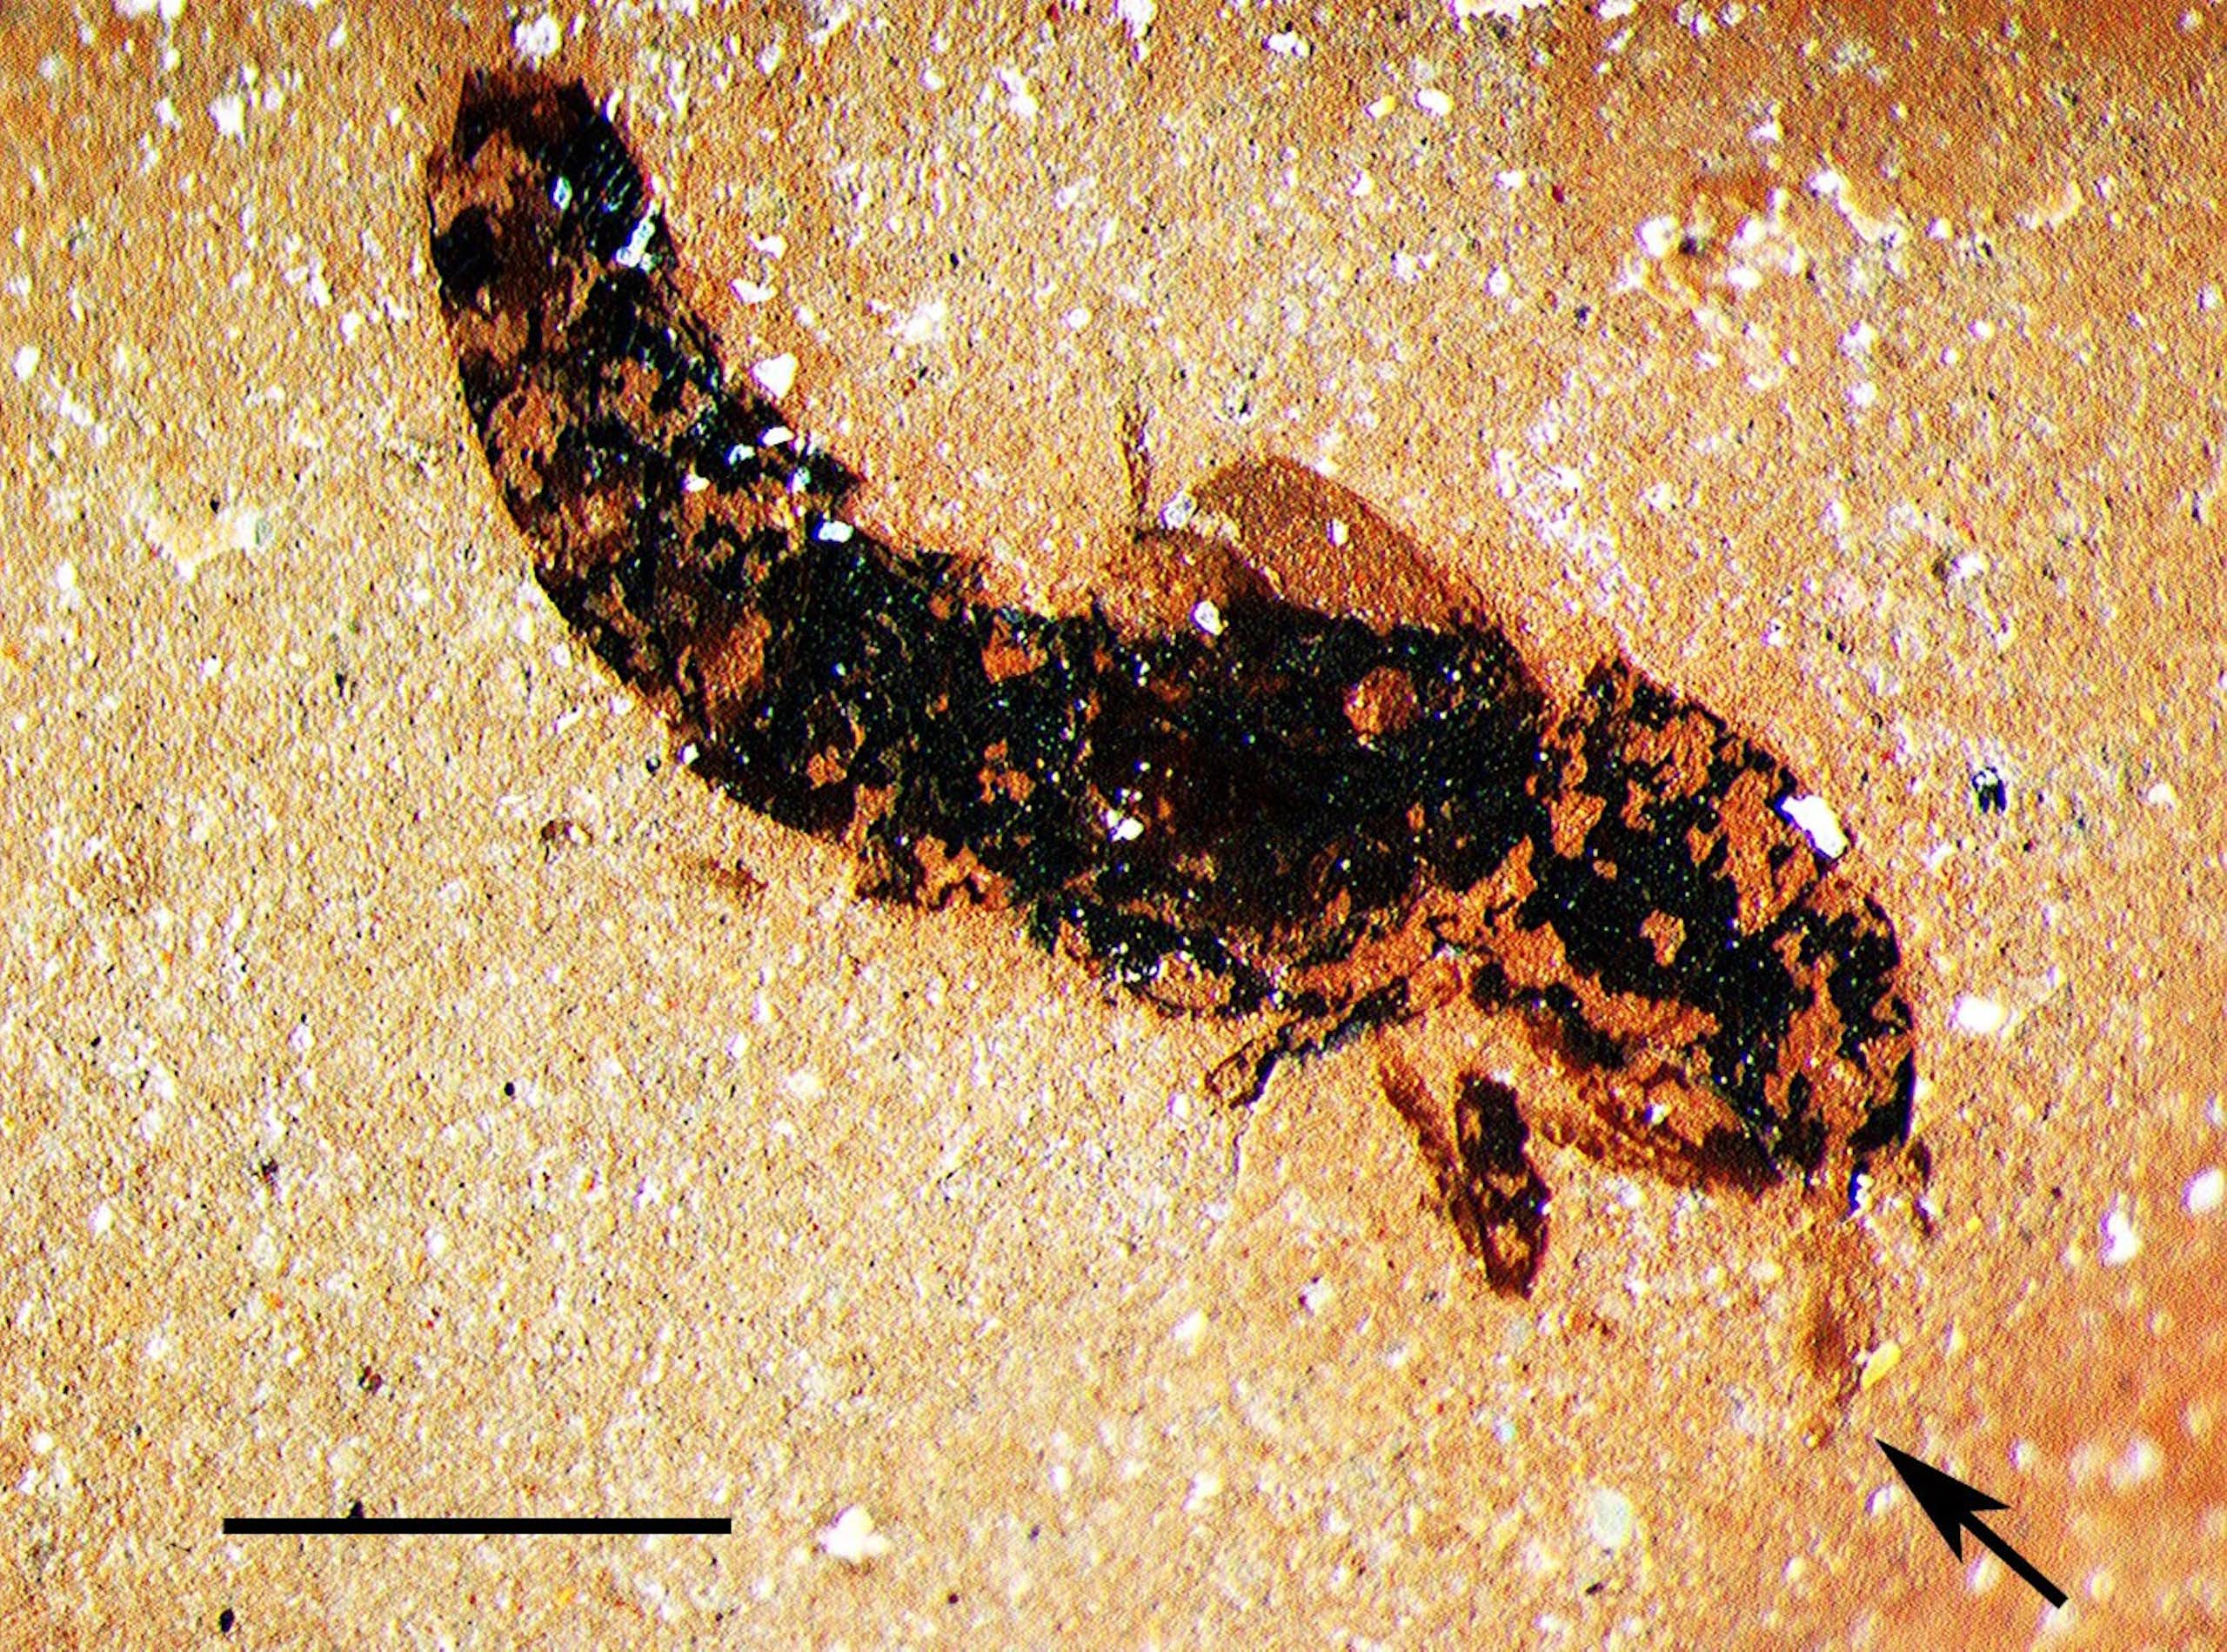 The fossilised imprint of a beetle with a thick thorax and tail and a long thin apparatus protruding from its mouth